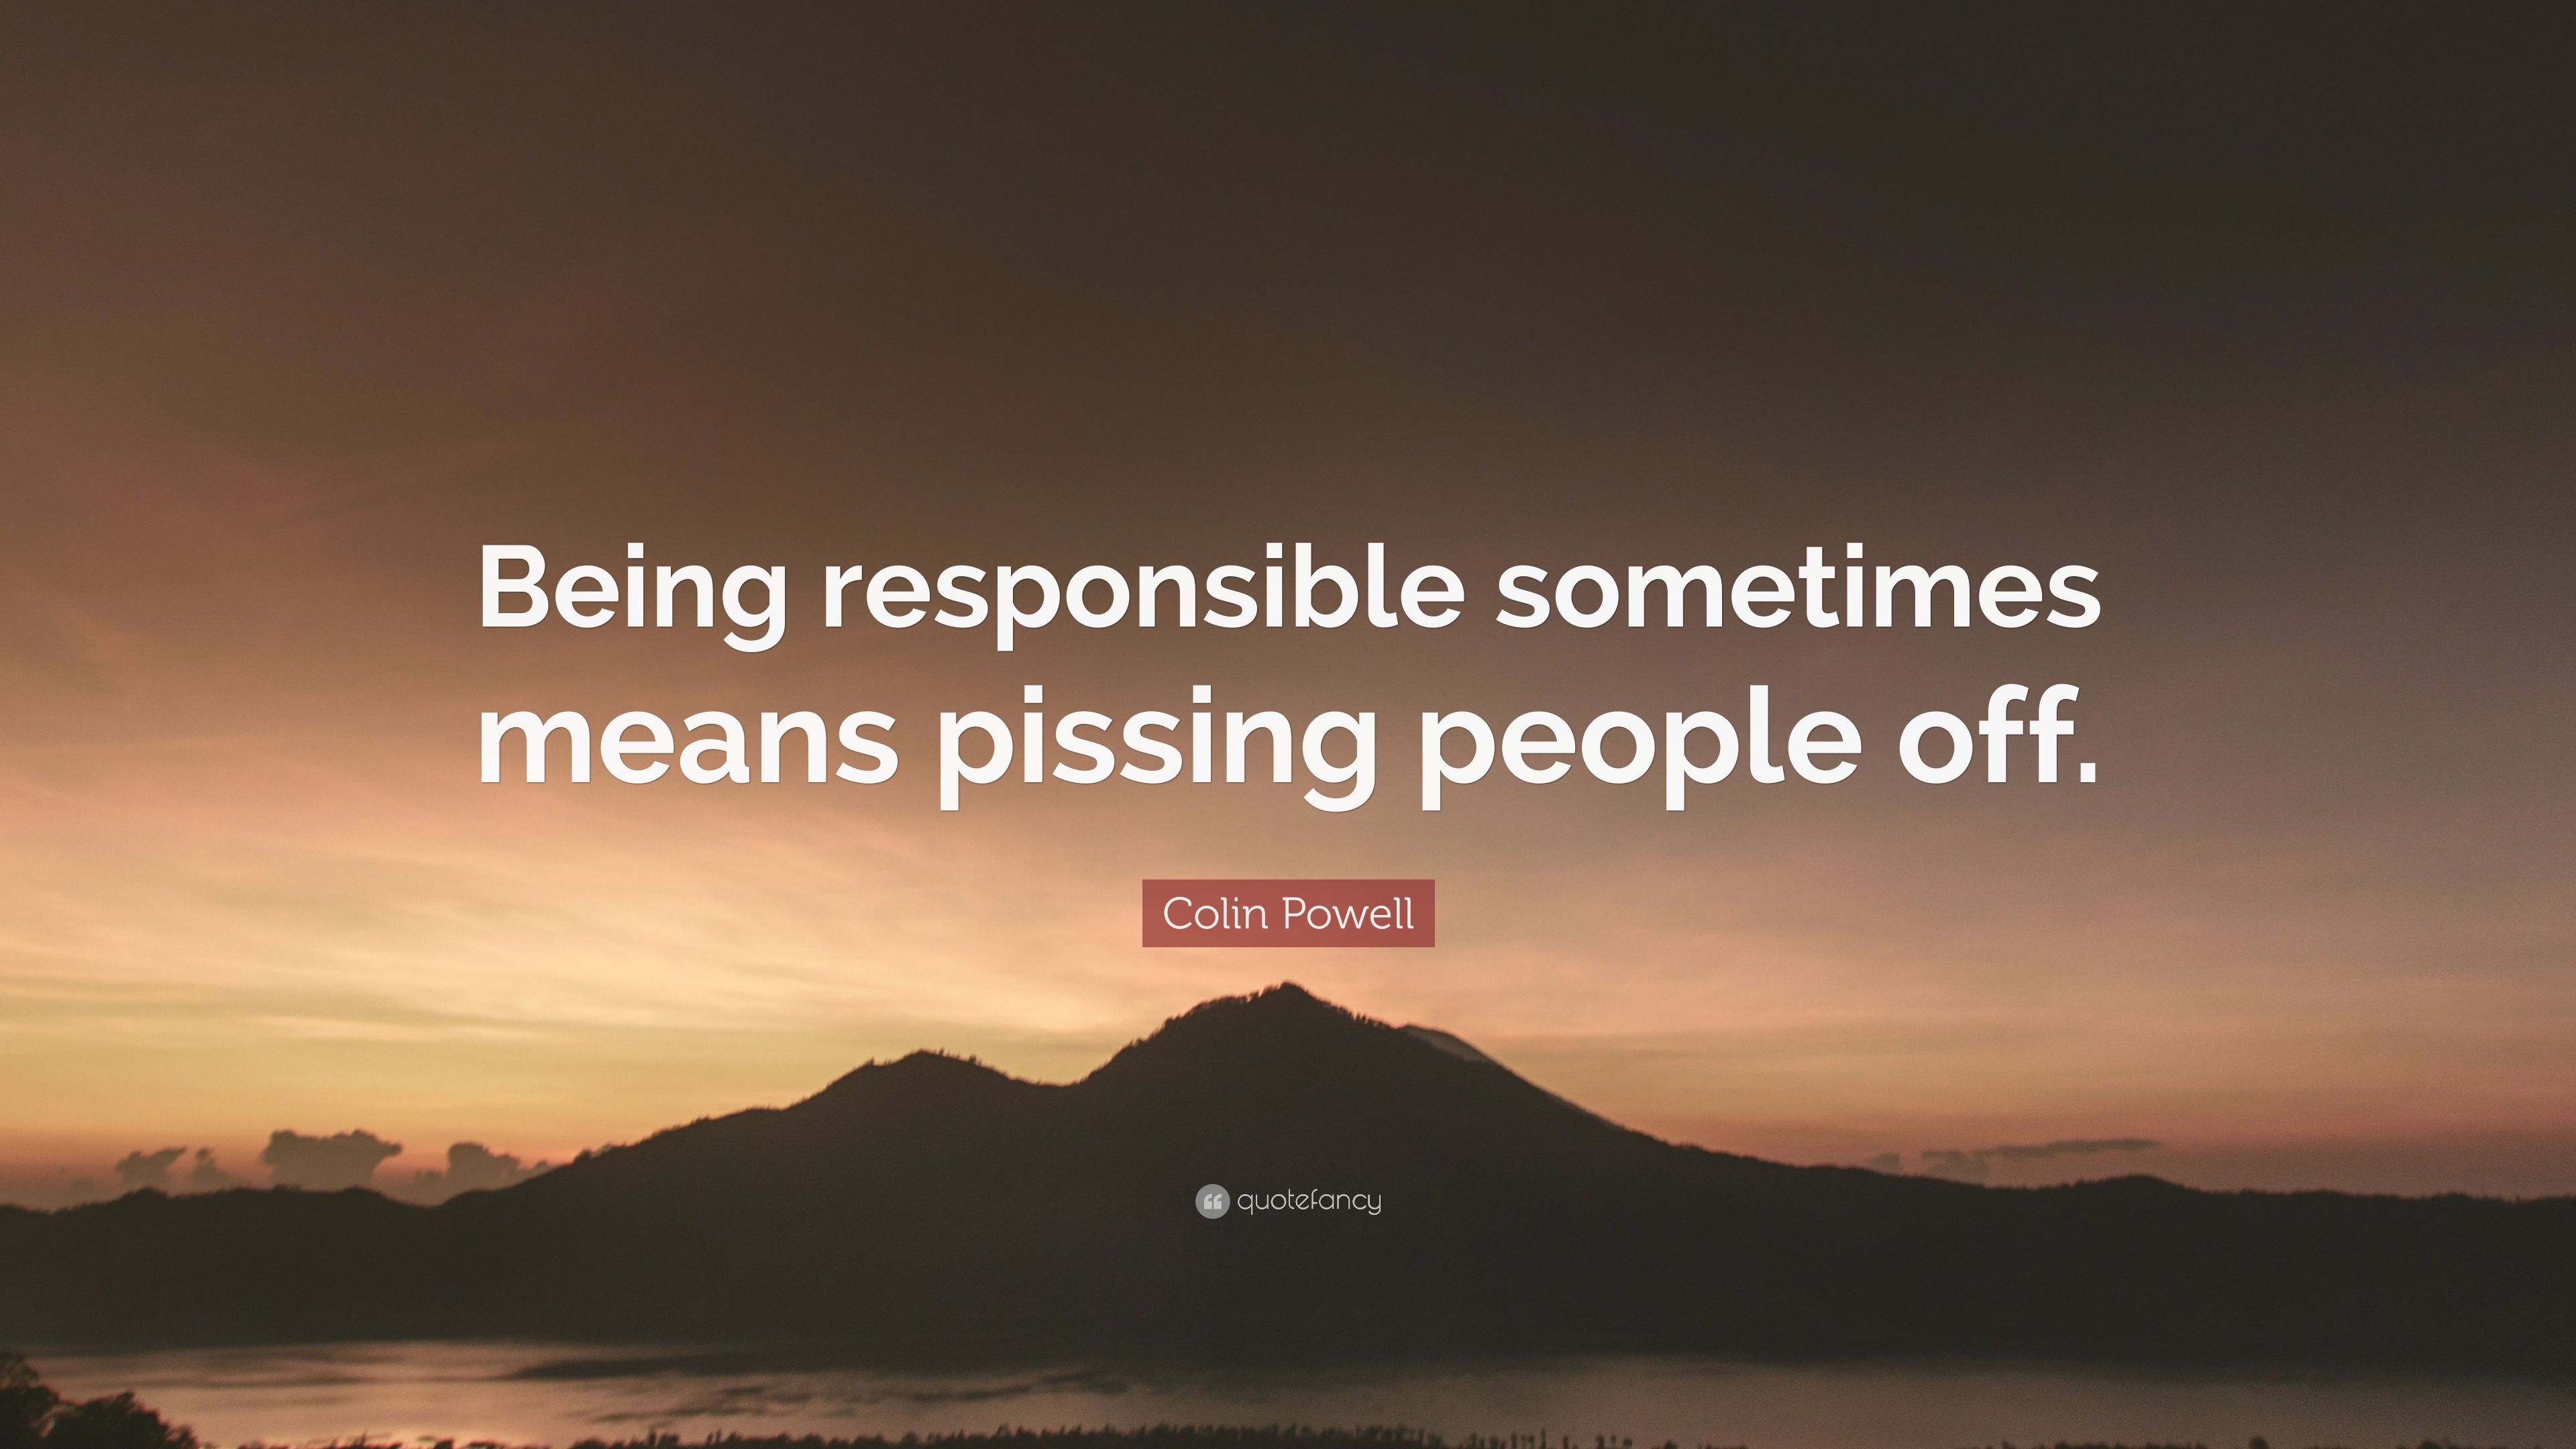 Colin powell quote some times means pissing people off 